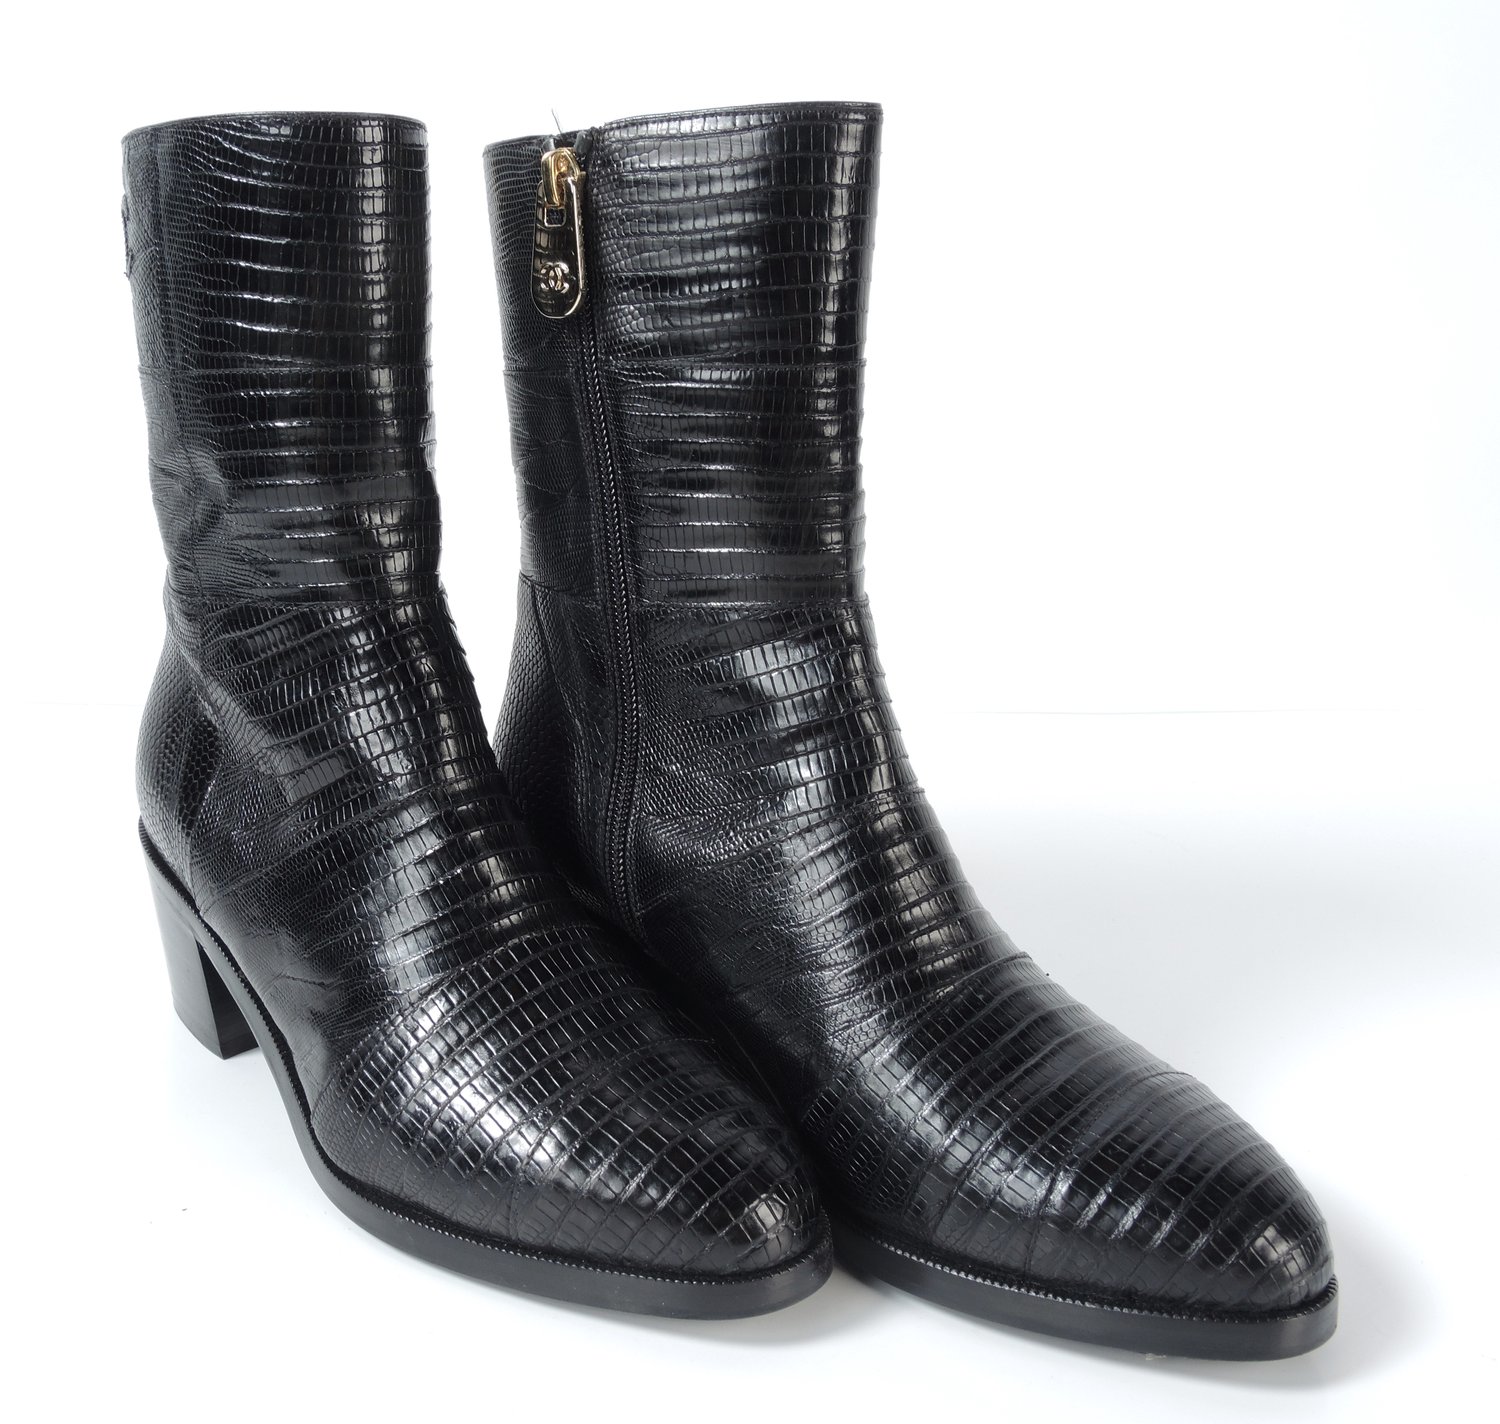 CHANEL Black Lizard 'Tejus' Boots (8) — Seams to Fit Women's Consignment